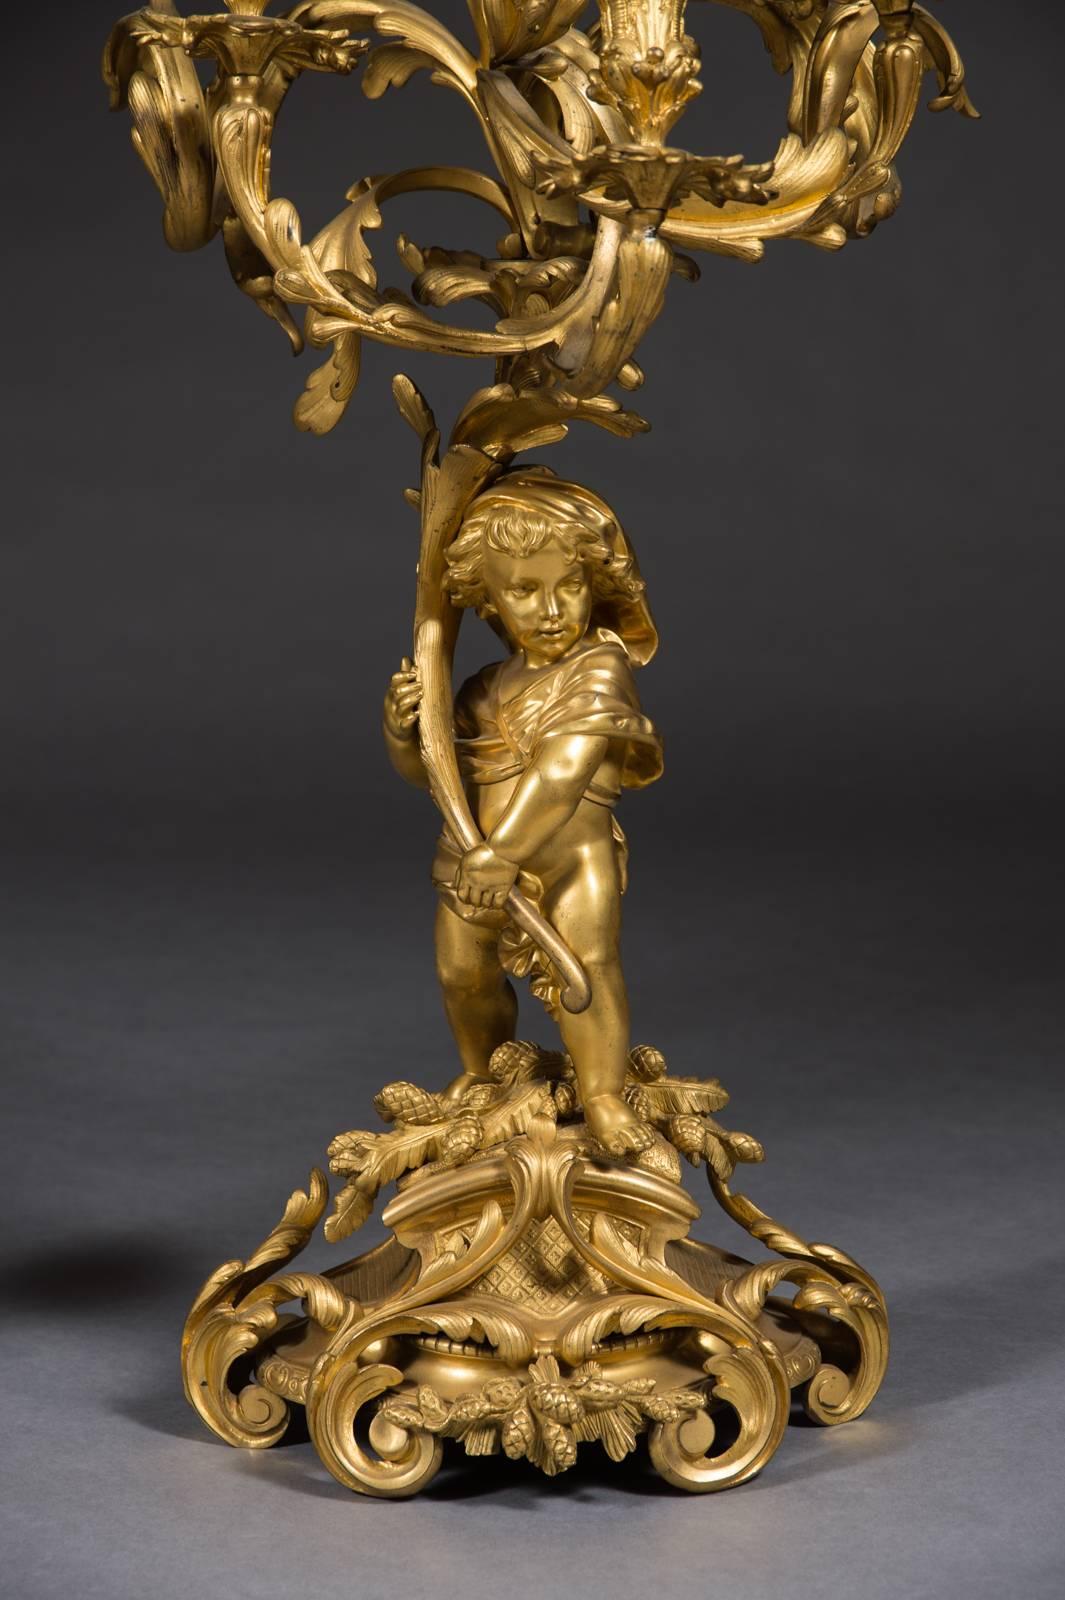 A very fine pair of 19th century French gilt bronze Napoleon III figural candelabras by Victor Raulin.
Each modeled in a form of  a standing putti supporting a branch with  a seven-arms candelabra. 

Signed: RAULIN.

Dimensions
Height: 32